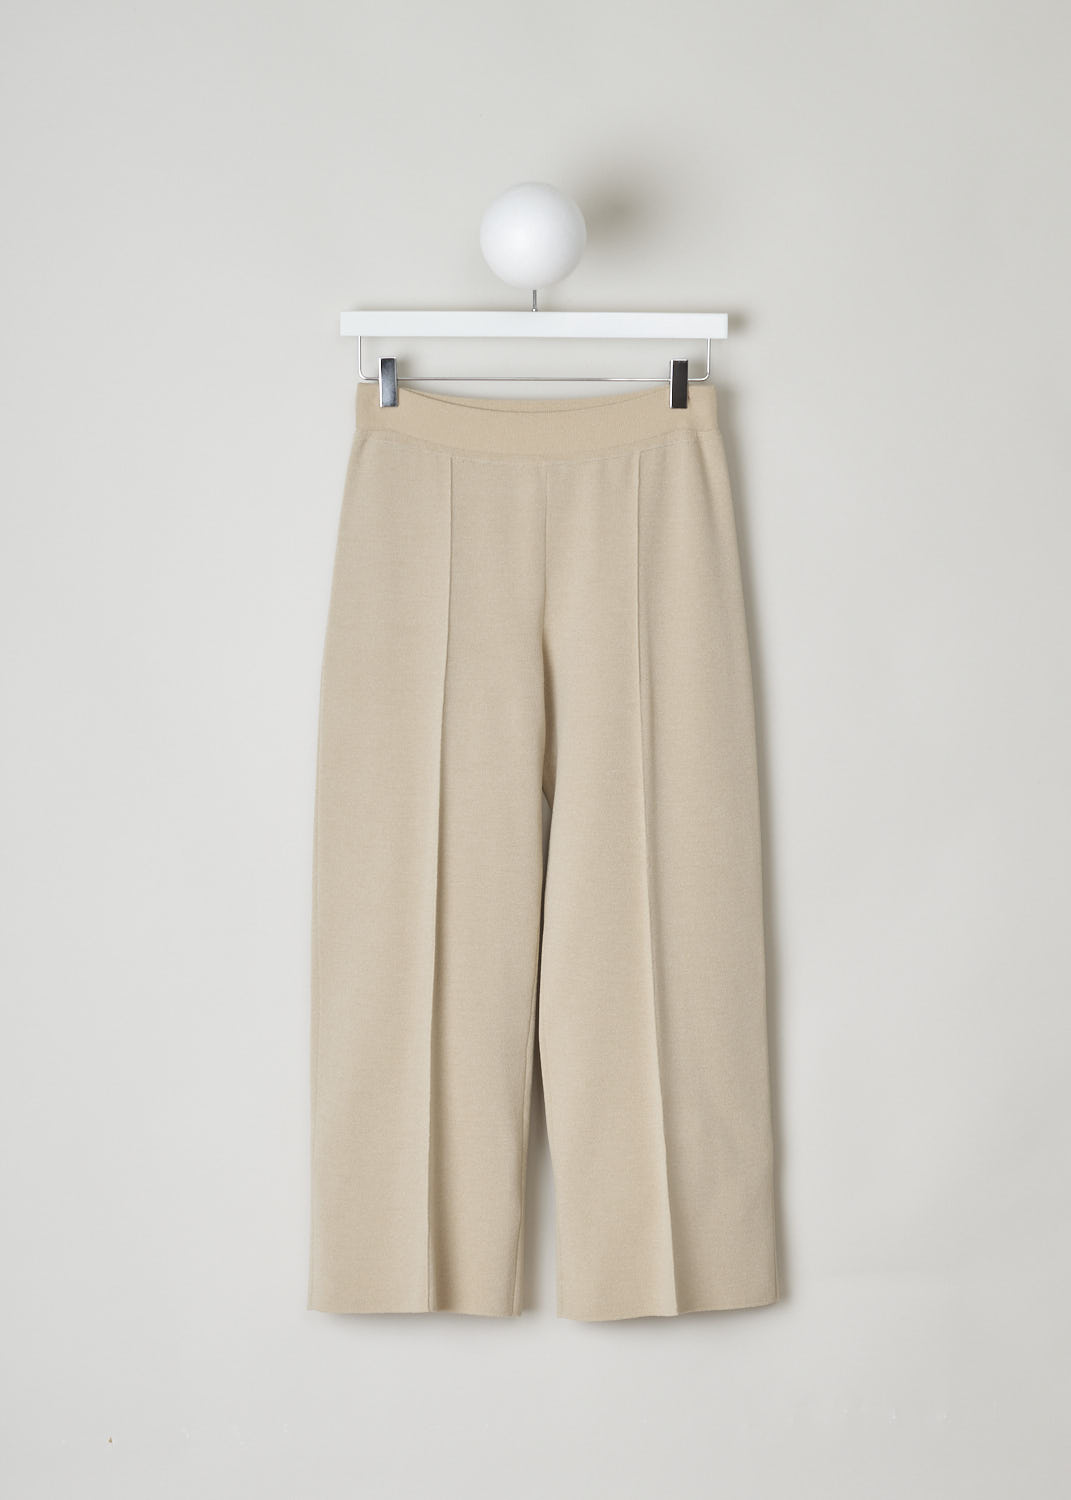 THE ROW, NUDE TAPERED TROUSERS, MARIA_PANT_3374Y205_NUDE, Beige, Front, These nude slip-on trousers feature an elasticated waistline. The trousers are form fitting throughout. Centre seam can be found front and back, creating a paneled look.
